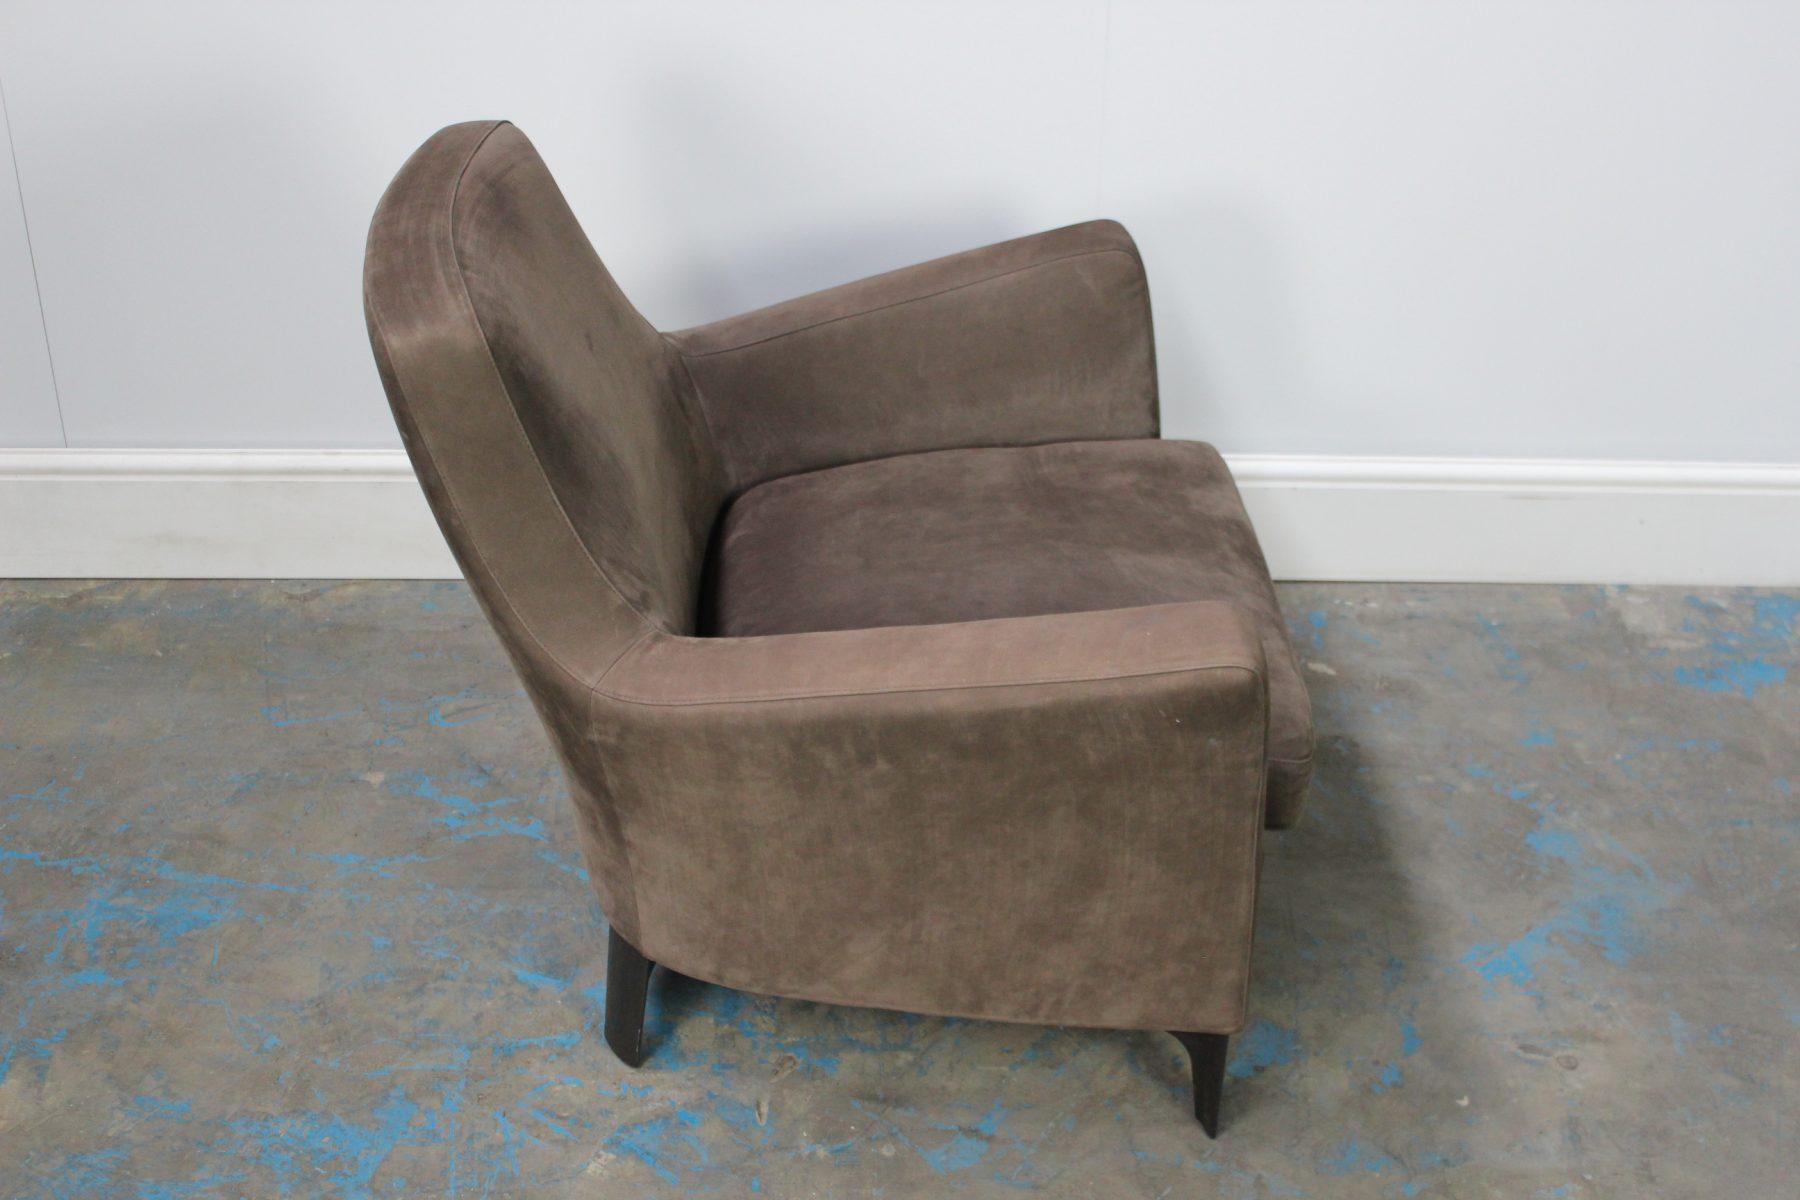 Peerless Pristine Minotti “Denny” Armchair in Suede Leather For Sale 4